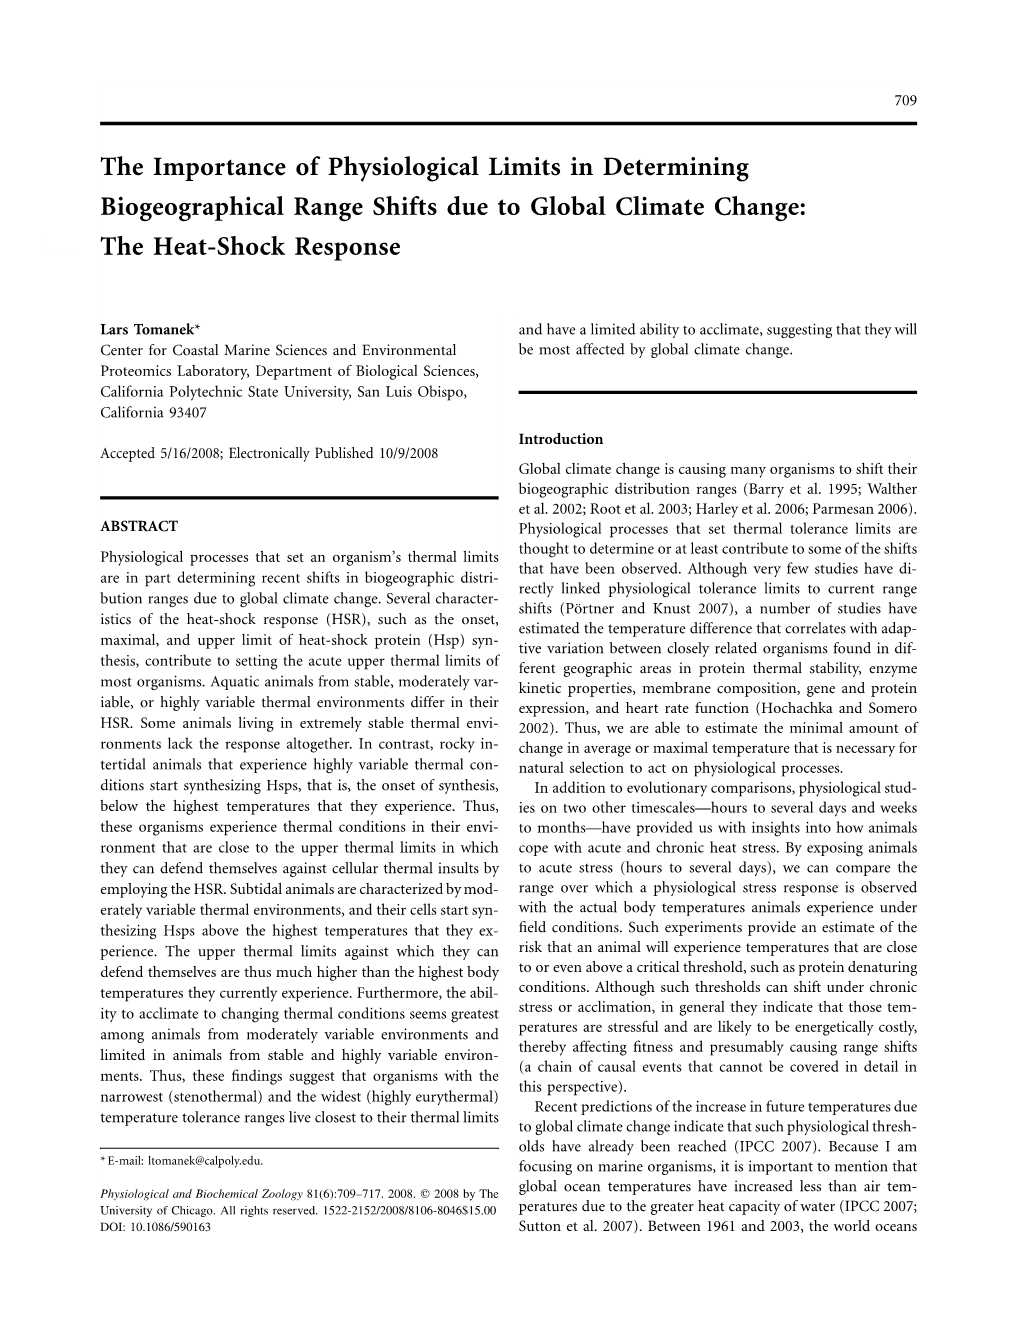 The Importance of Physiological Limits in Determining Biogeographical Range Shifts Due to Global Climate Change: the Heat-Shock Response